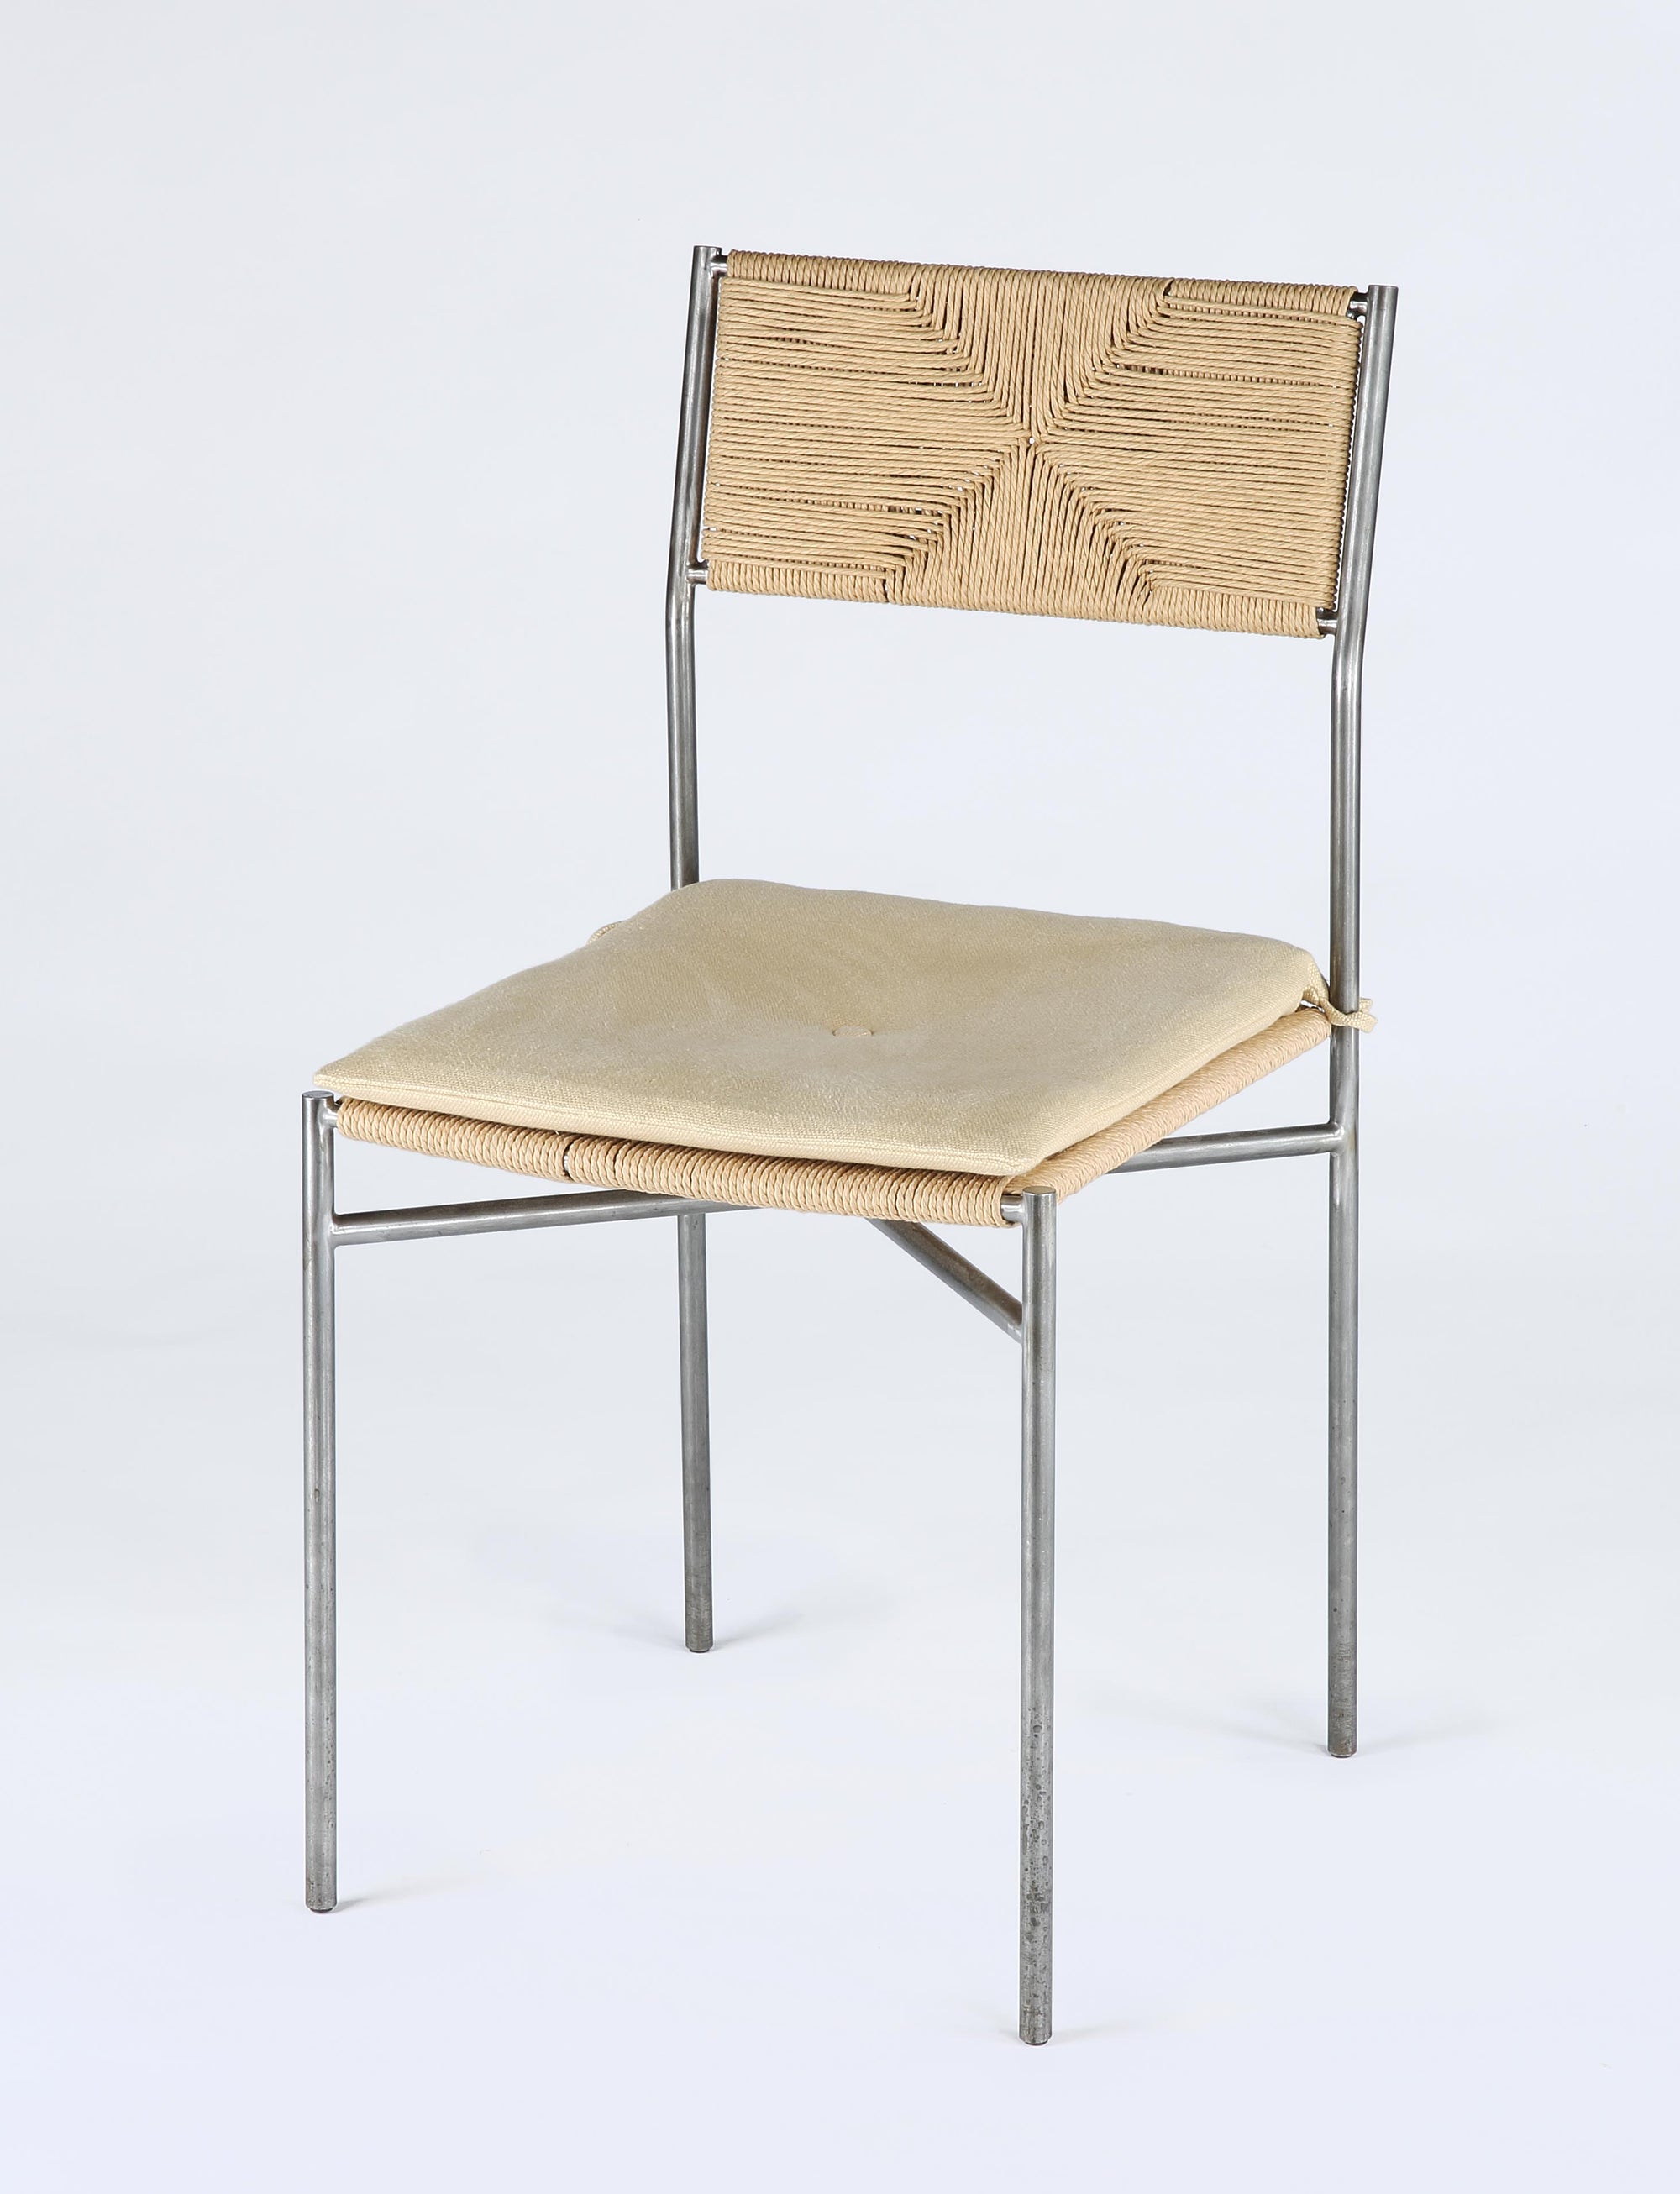 Simple Dining Chair